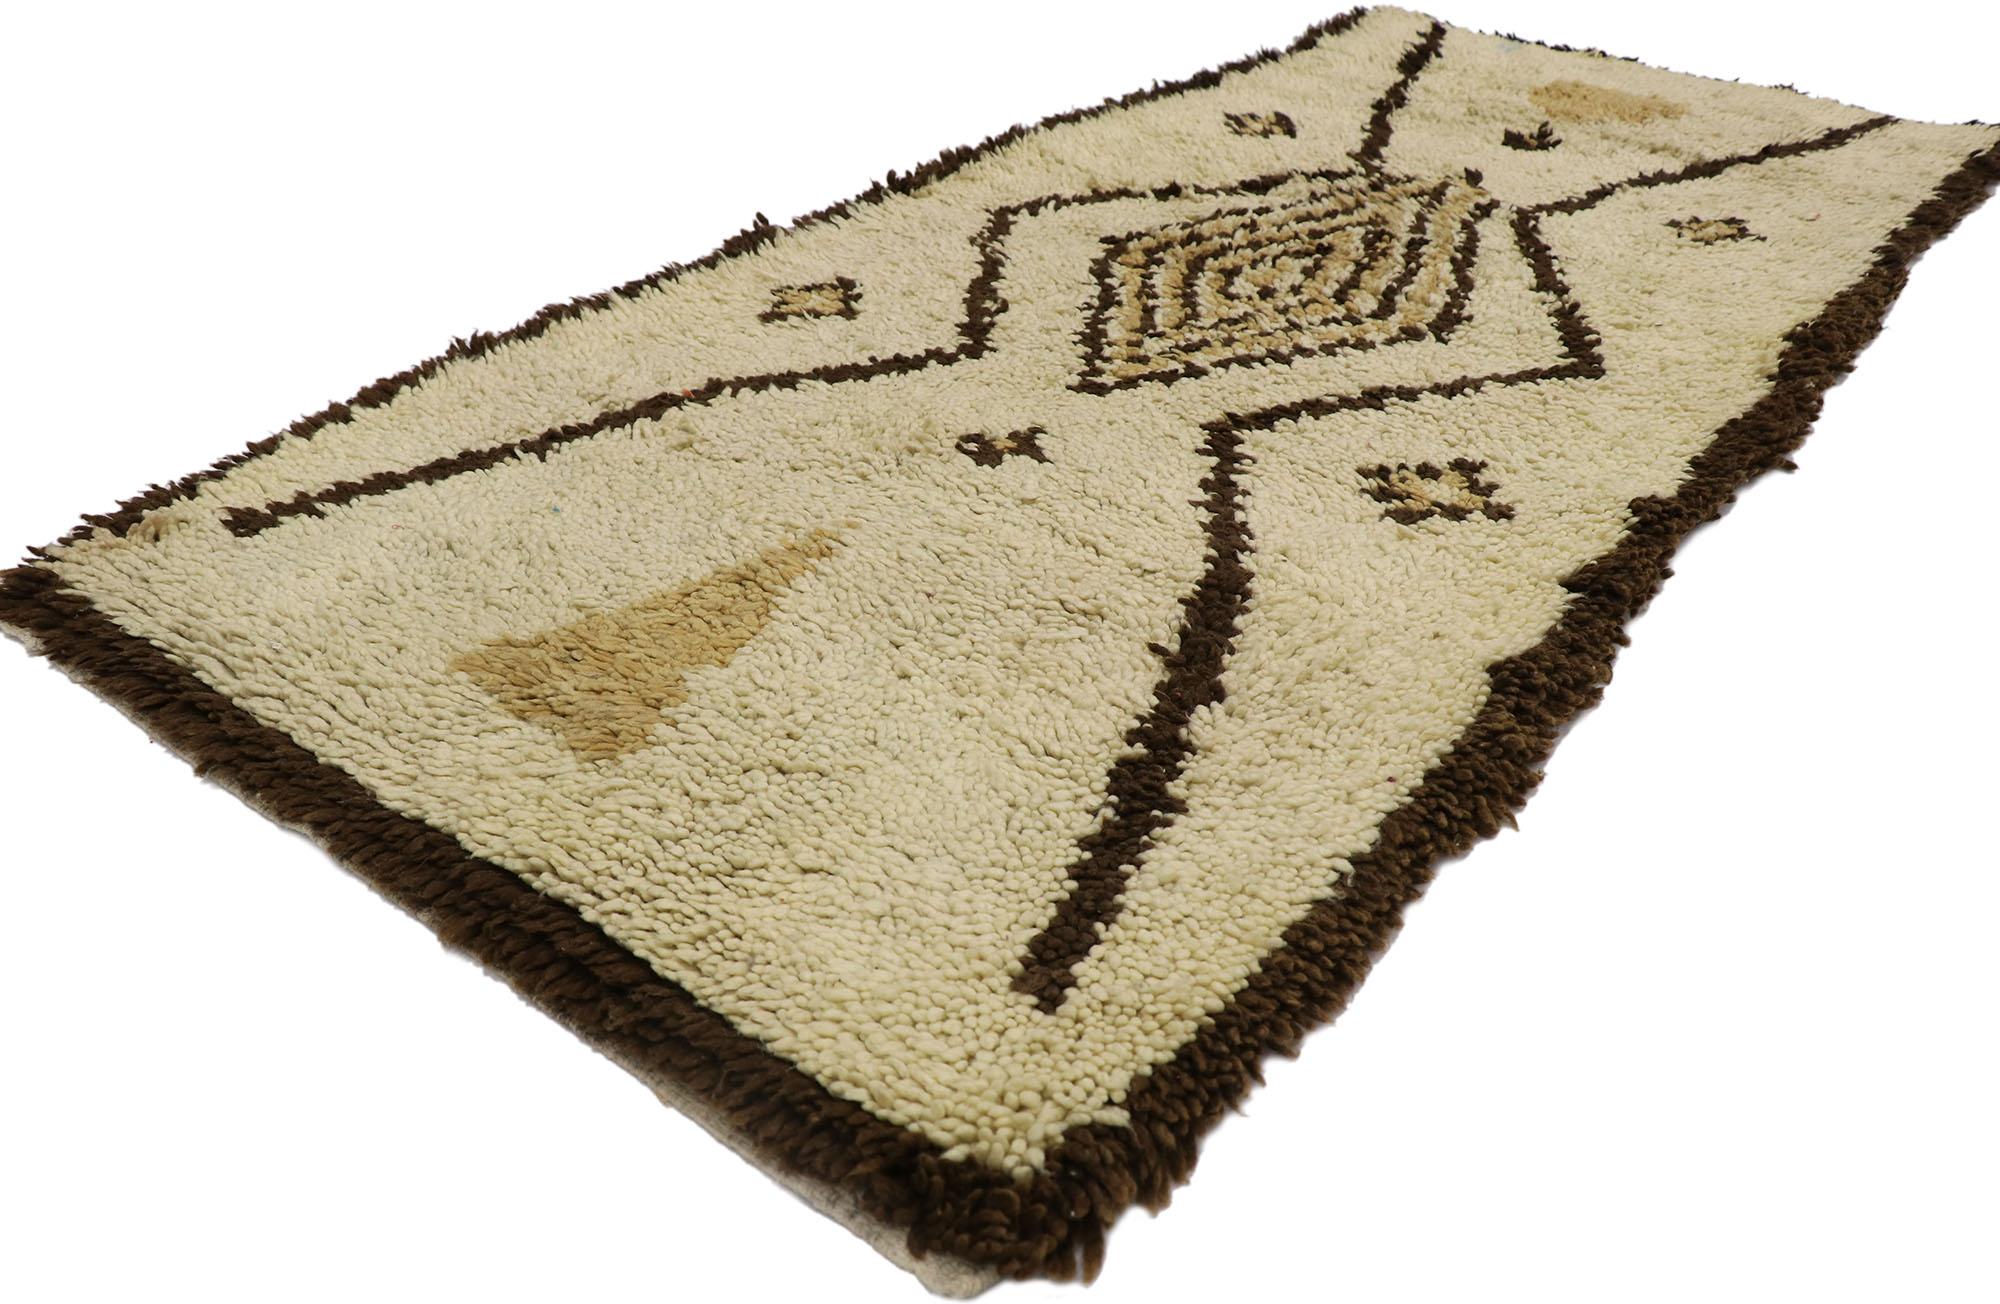 21549 vintage Berber Moroccan rug with Mid-Century Modern style 02'10 x 06'02. With its simplicity, Mid-Century Modern style, incredible detail and texture, this hand knotted wool vintage Berber Moroccan rug is a captivating vision of woven beauty.